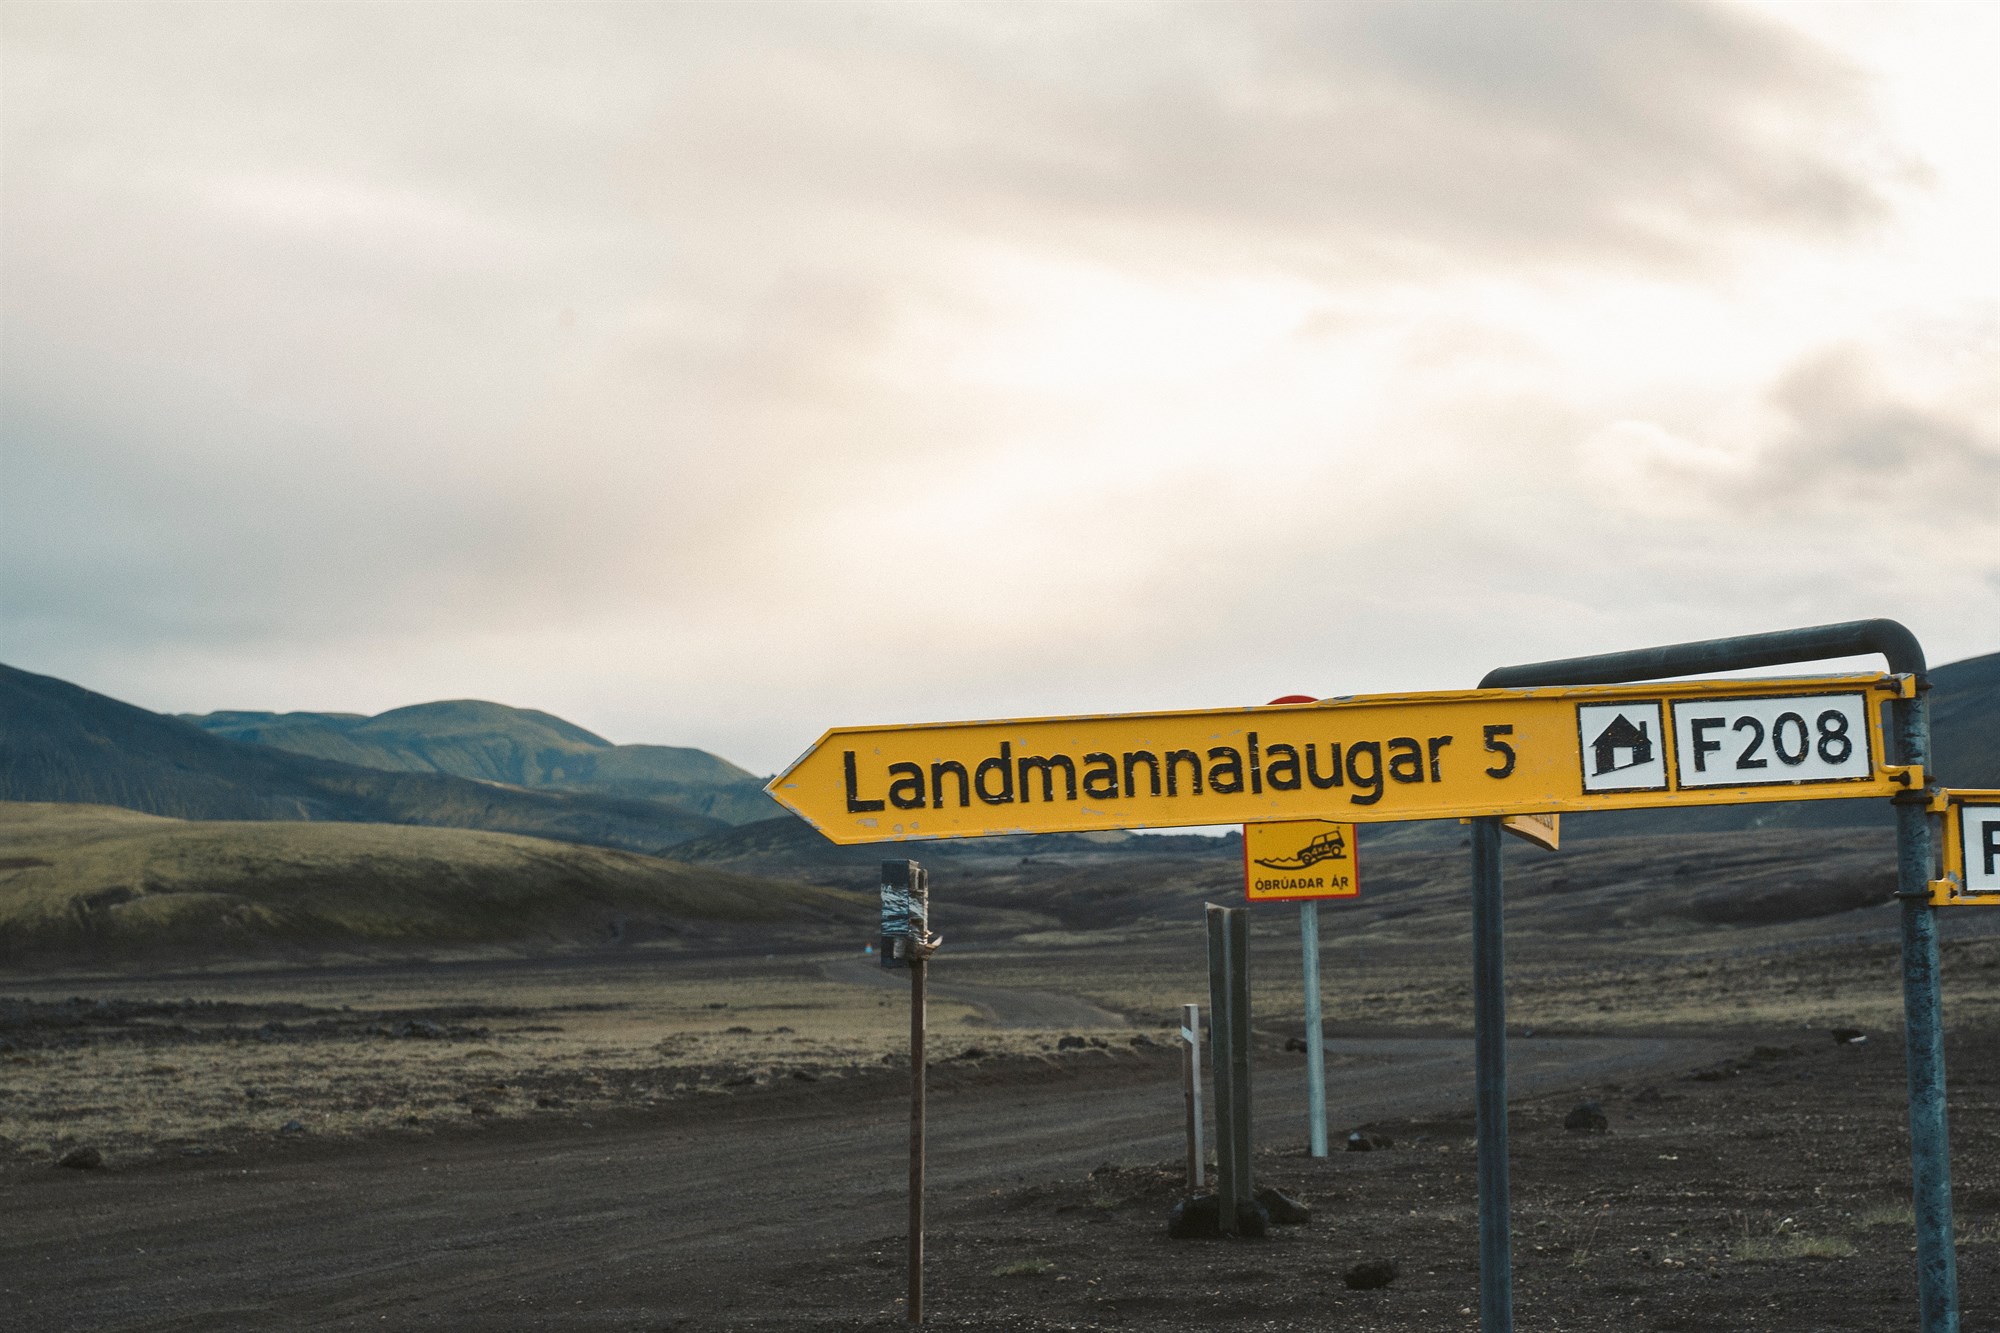 Road signs directing drivers to Landmannalaugar in Iceland